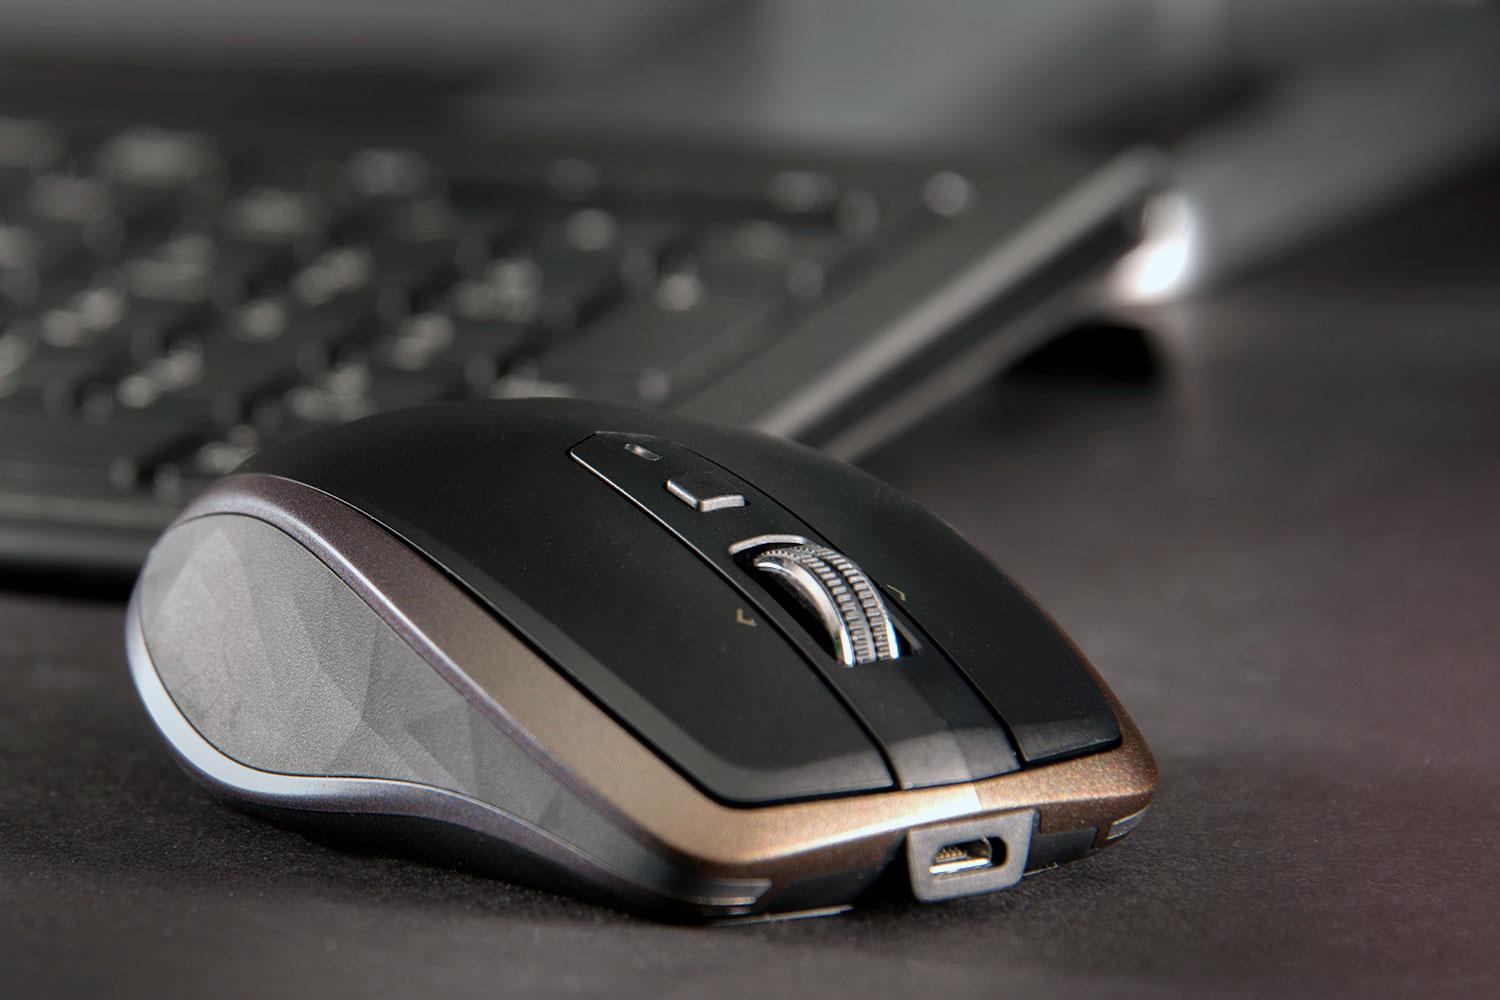 Logitech MX Anywhere 2 Mouse Review | Digital Trends